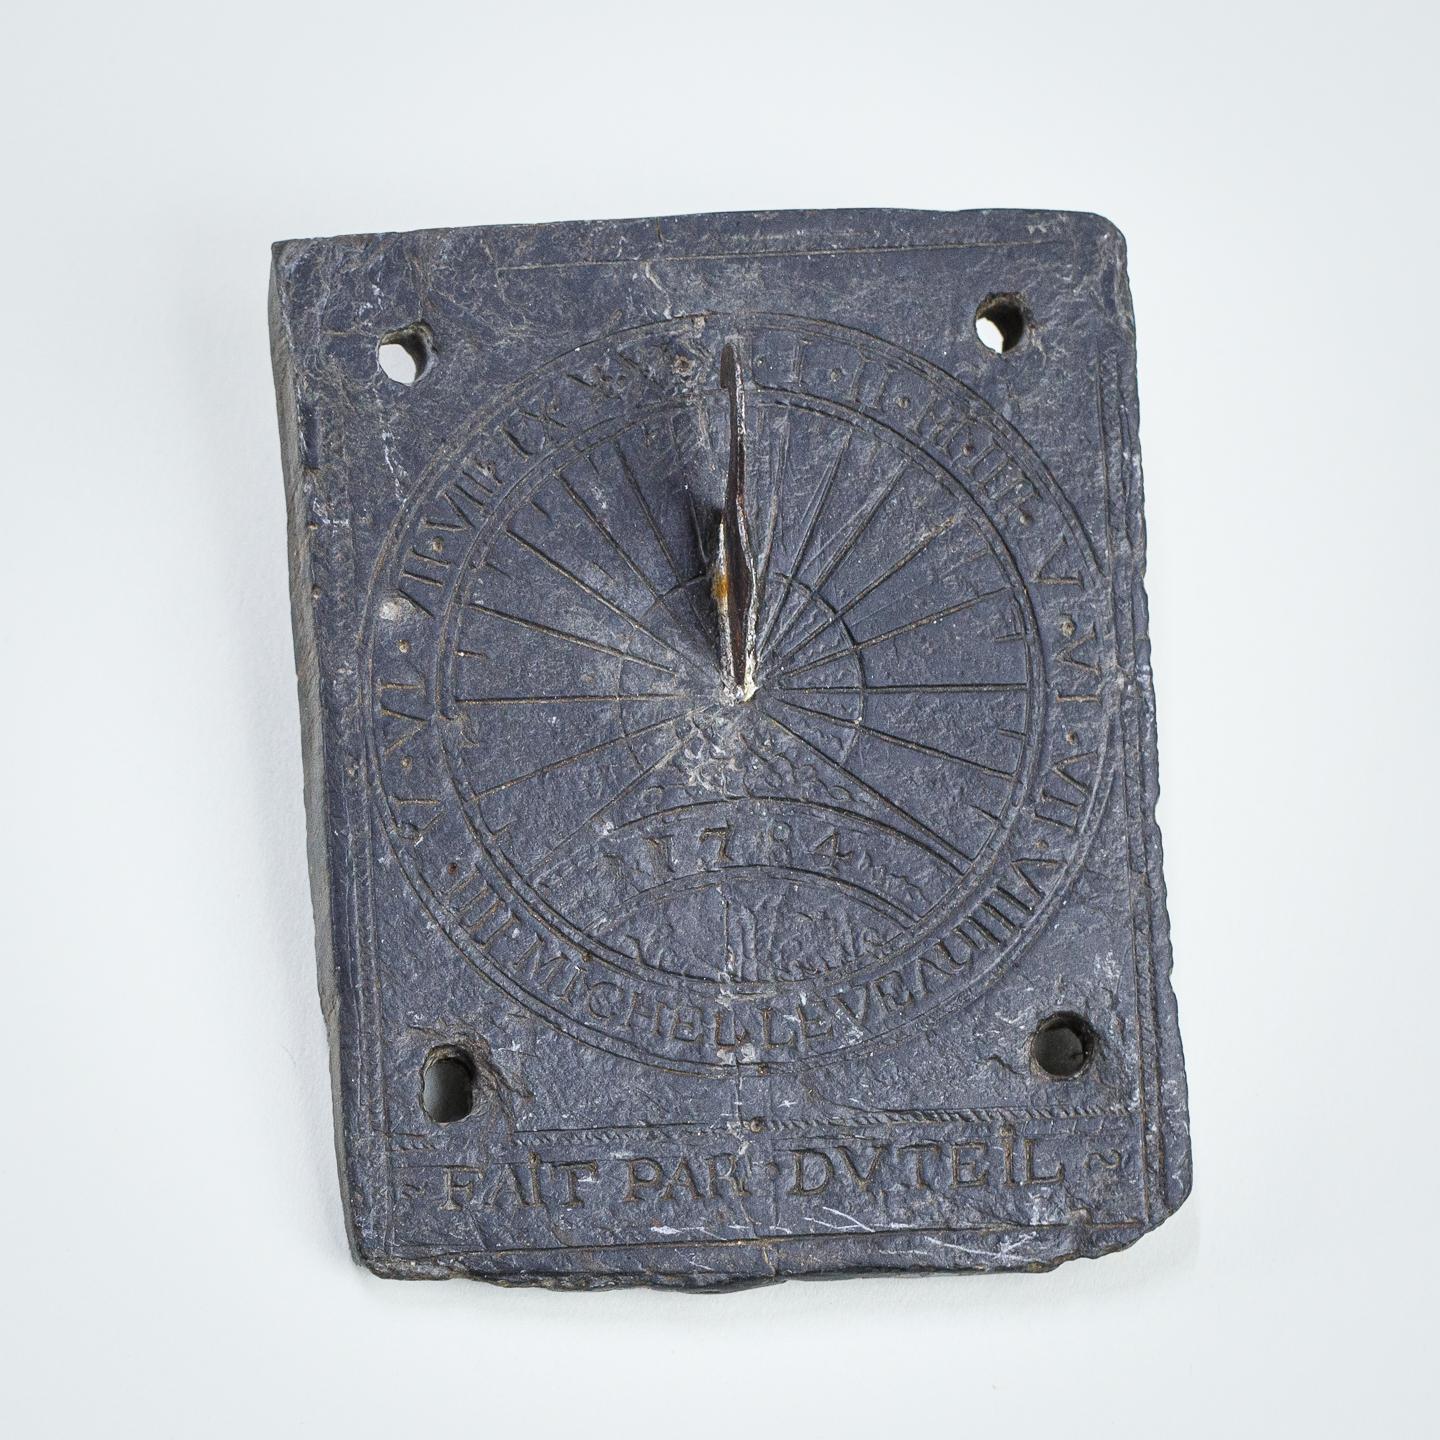 Rare Diminutive 18th Century Sundial Plate Signed and Dated In Fair Condition For Sale In Pease pottage, West Sussex